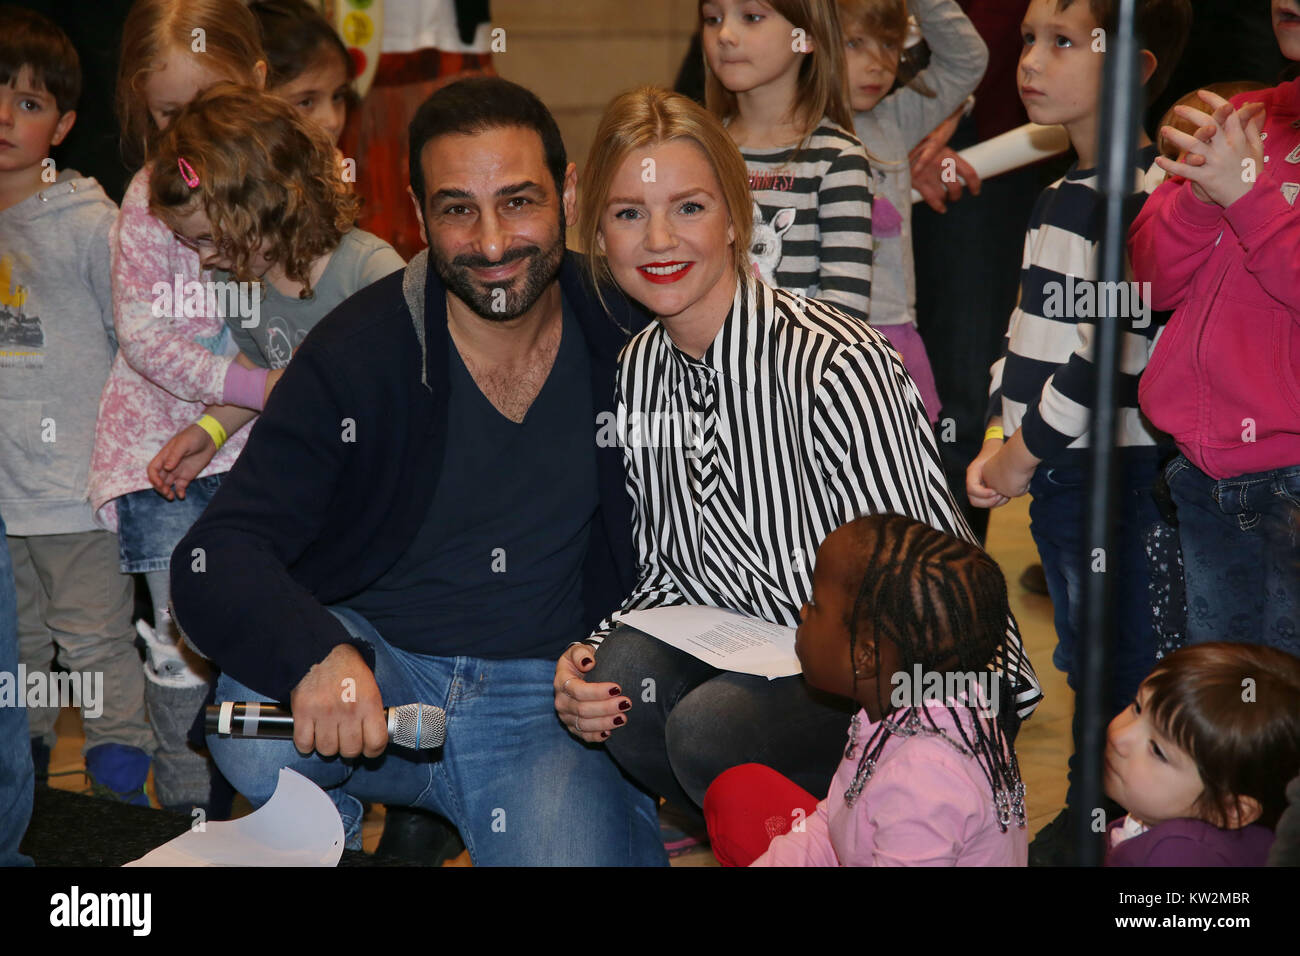 Charity gift wrapping with stars for 'Ein Herz fuer Kinder' at the shopping mall Europa Passage in Hamburg  Featuring: Kim Sarah Brandts, Volkan Baydar Where: Hamburg, Germany When: 27 Nov 2017 Credit: Becher/WENN.com Stock Photo